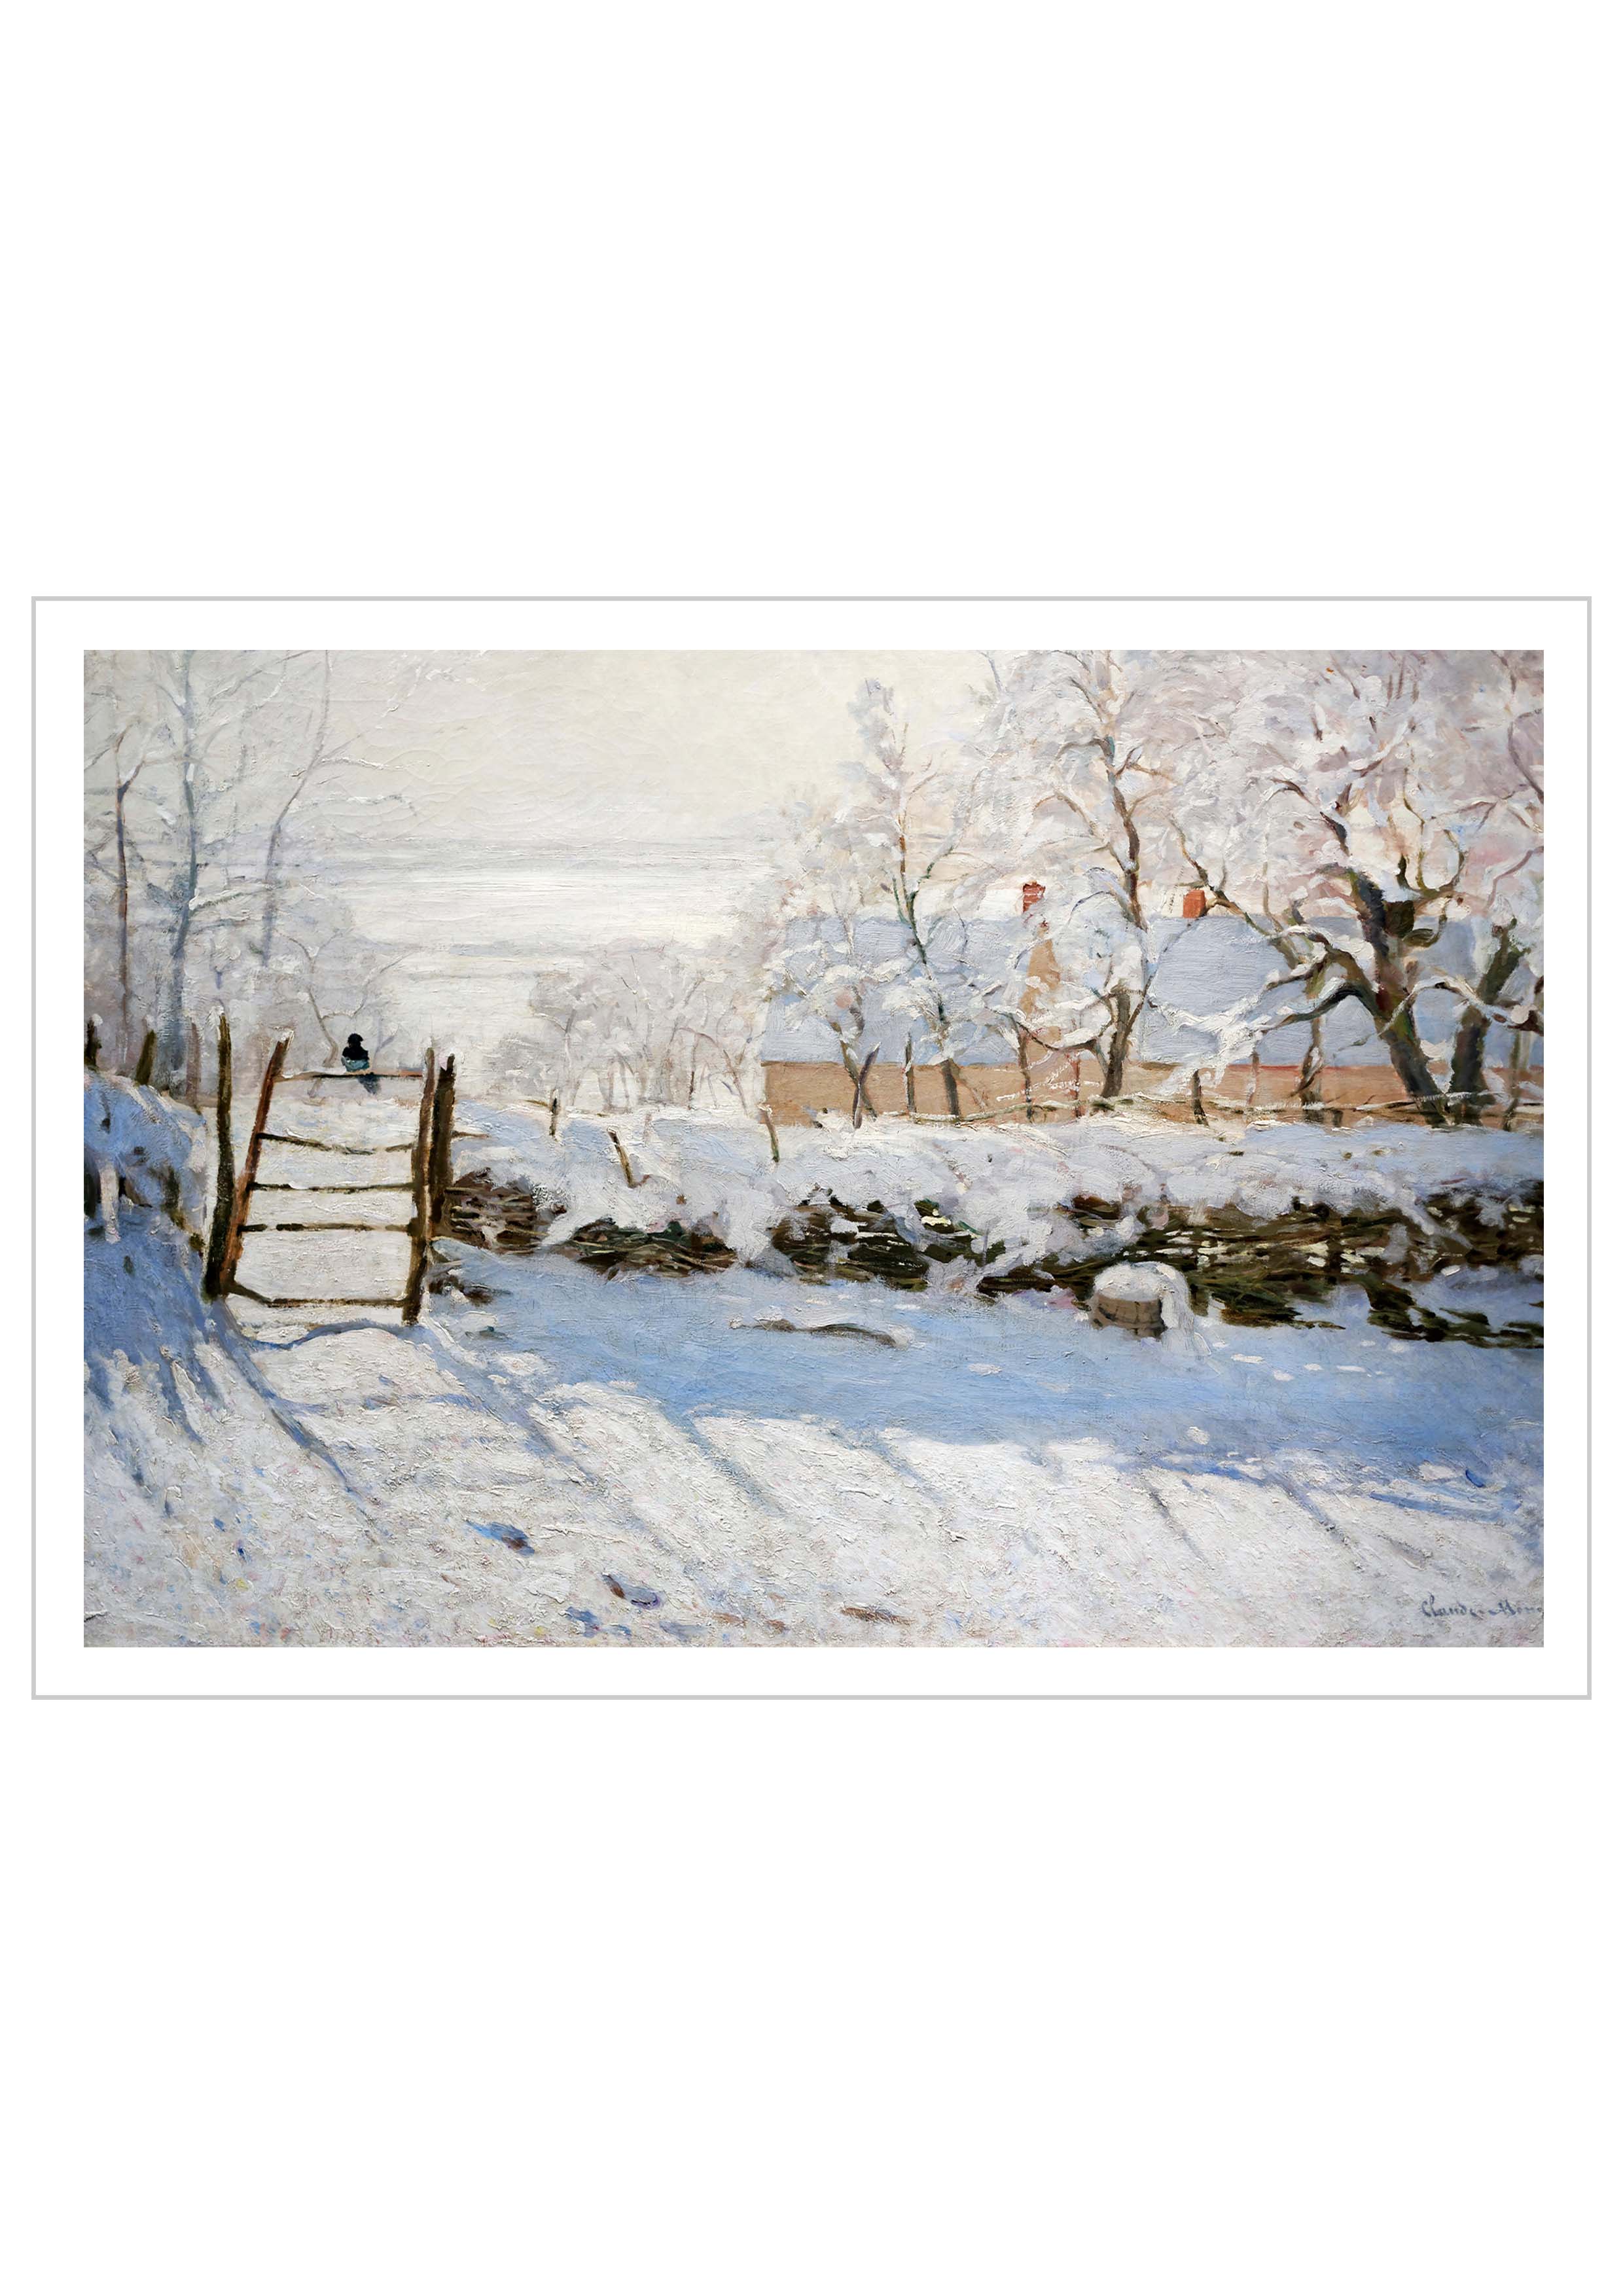 The Magpie is an oil-on-canvas landscape painting by the French Impressionist Claude Monet, created during the winter of 1868–1869 near the commune of Étretat in Normandy.